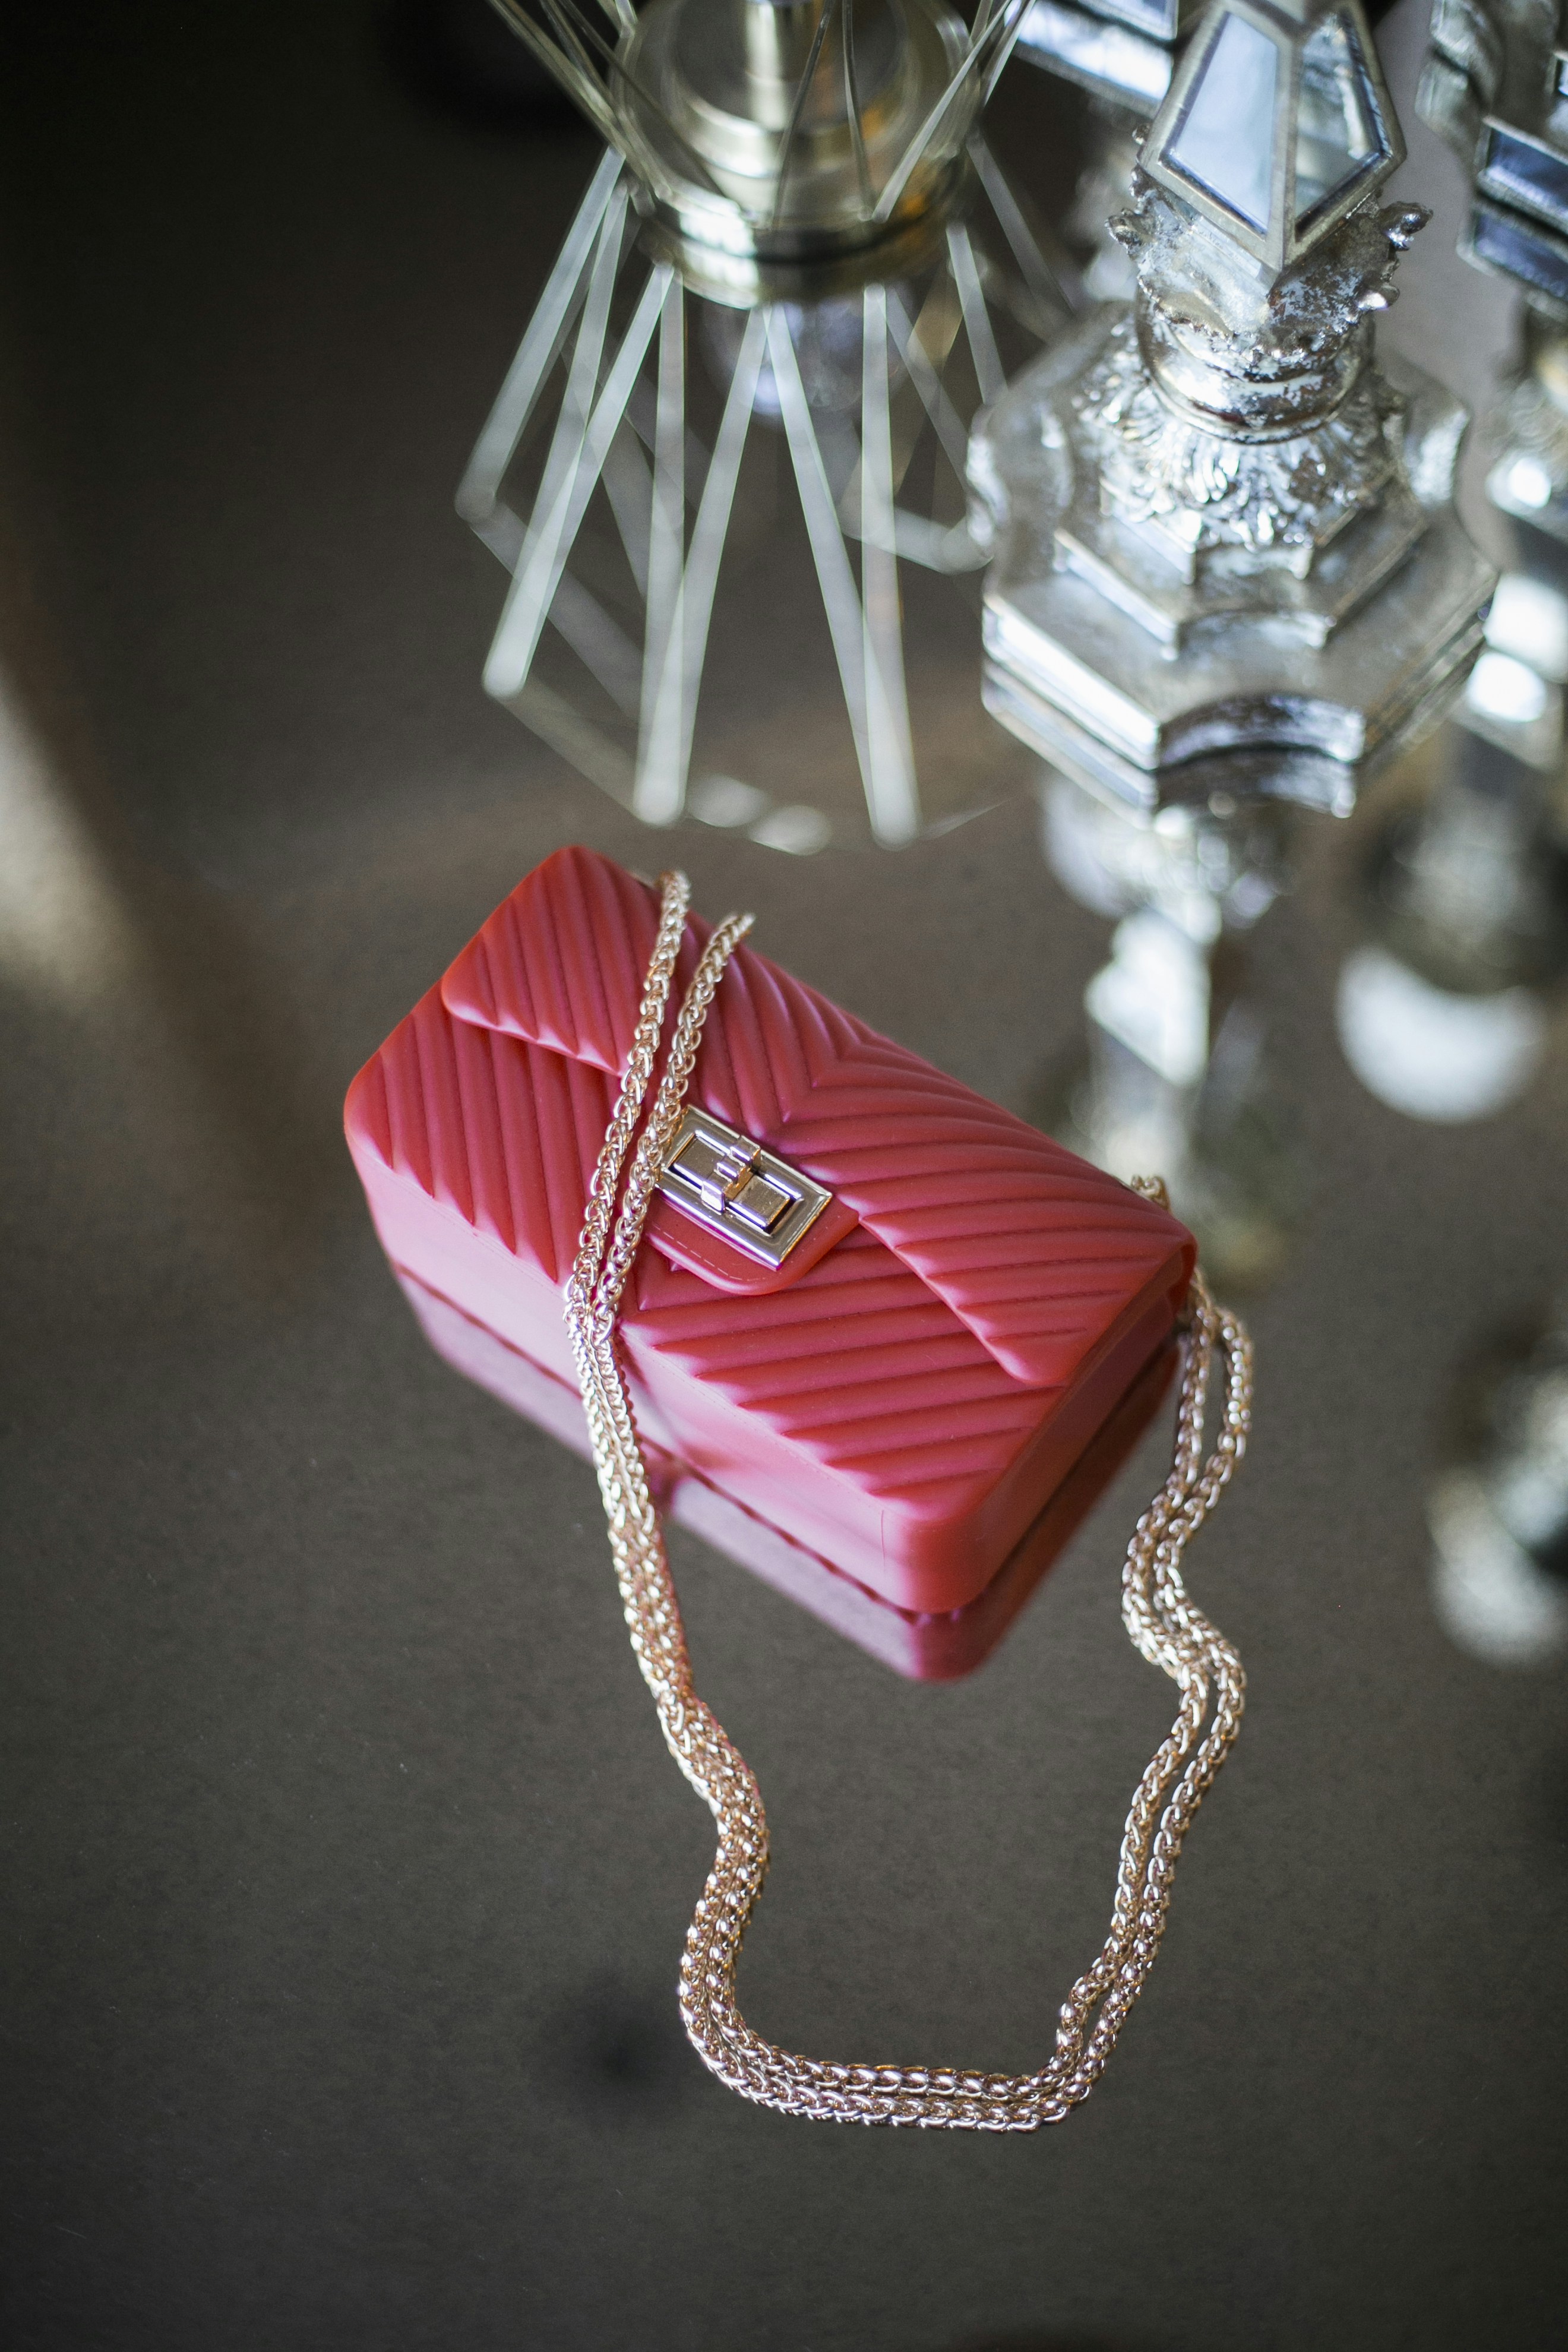 A red purse sits on a reflective surface.